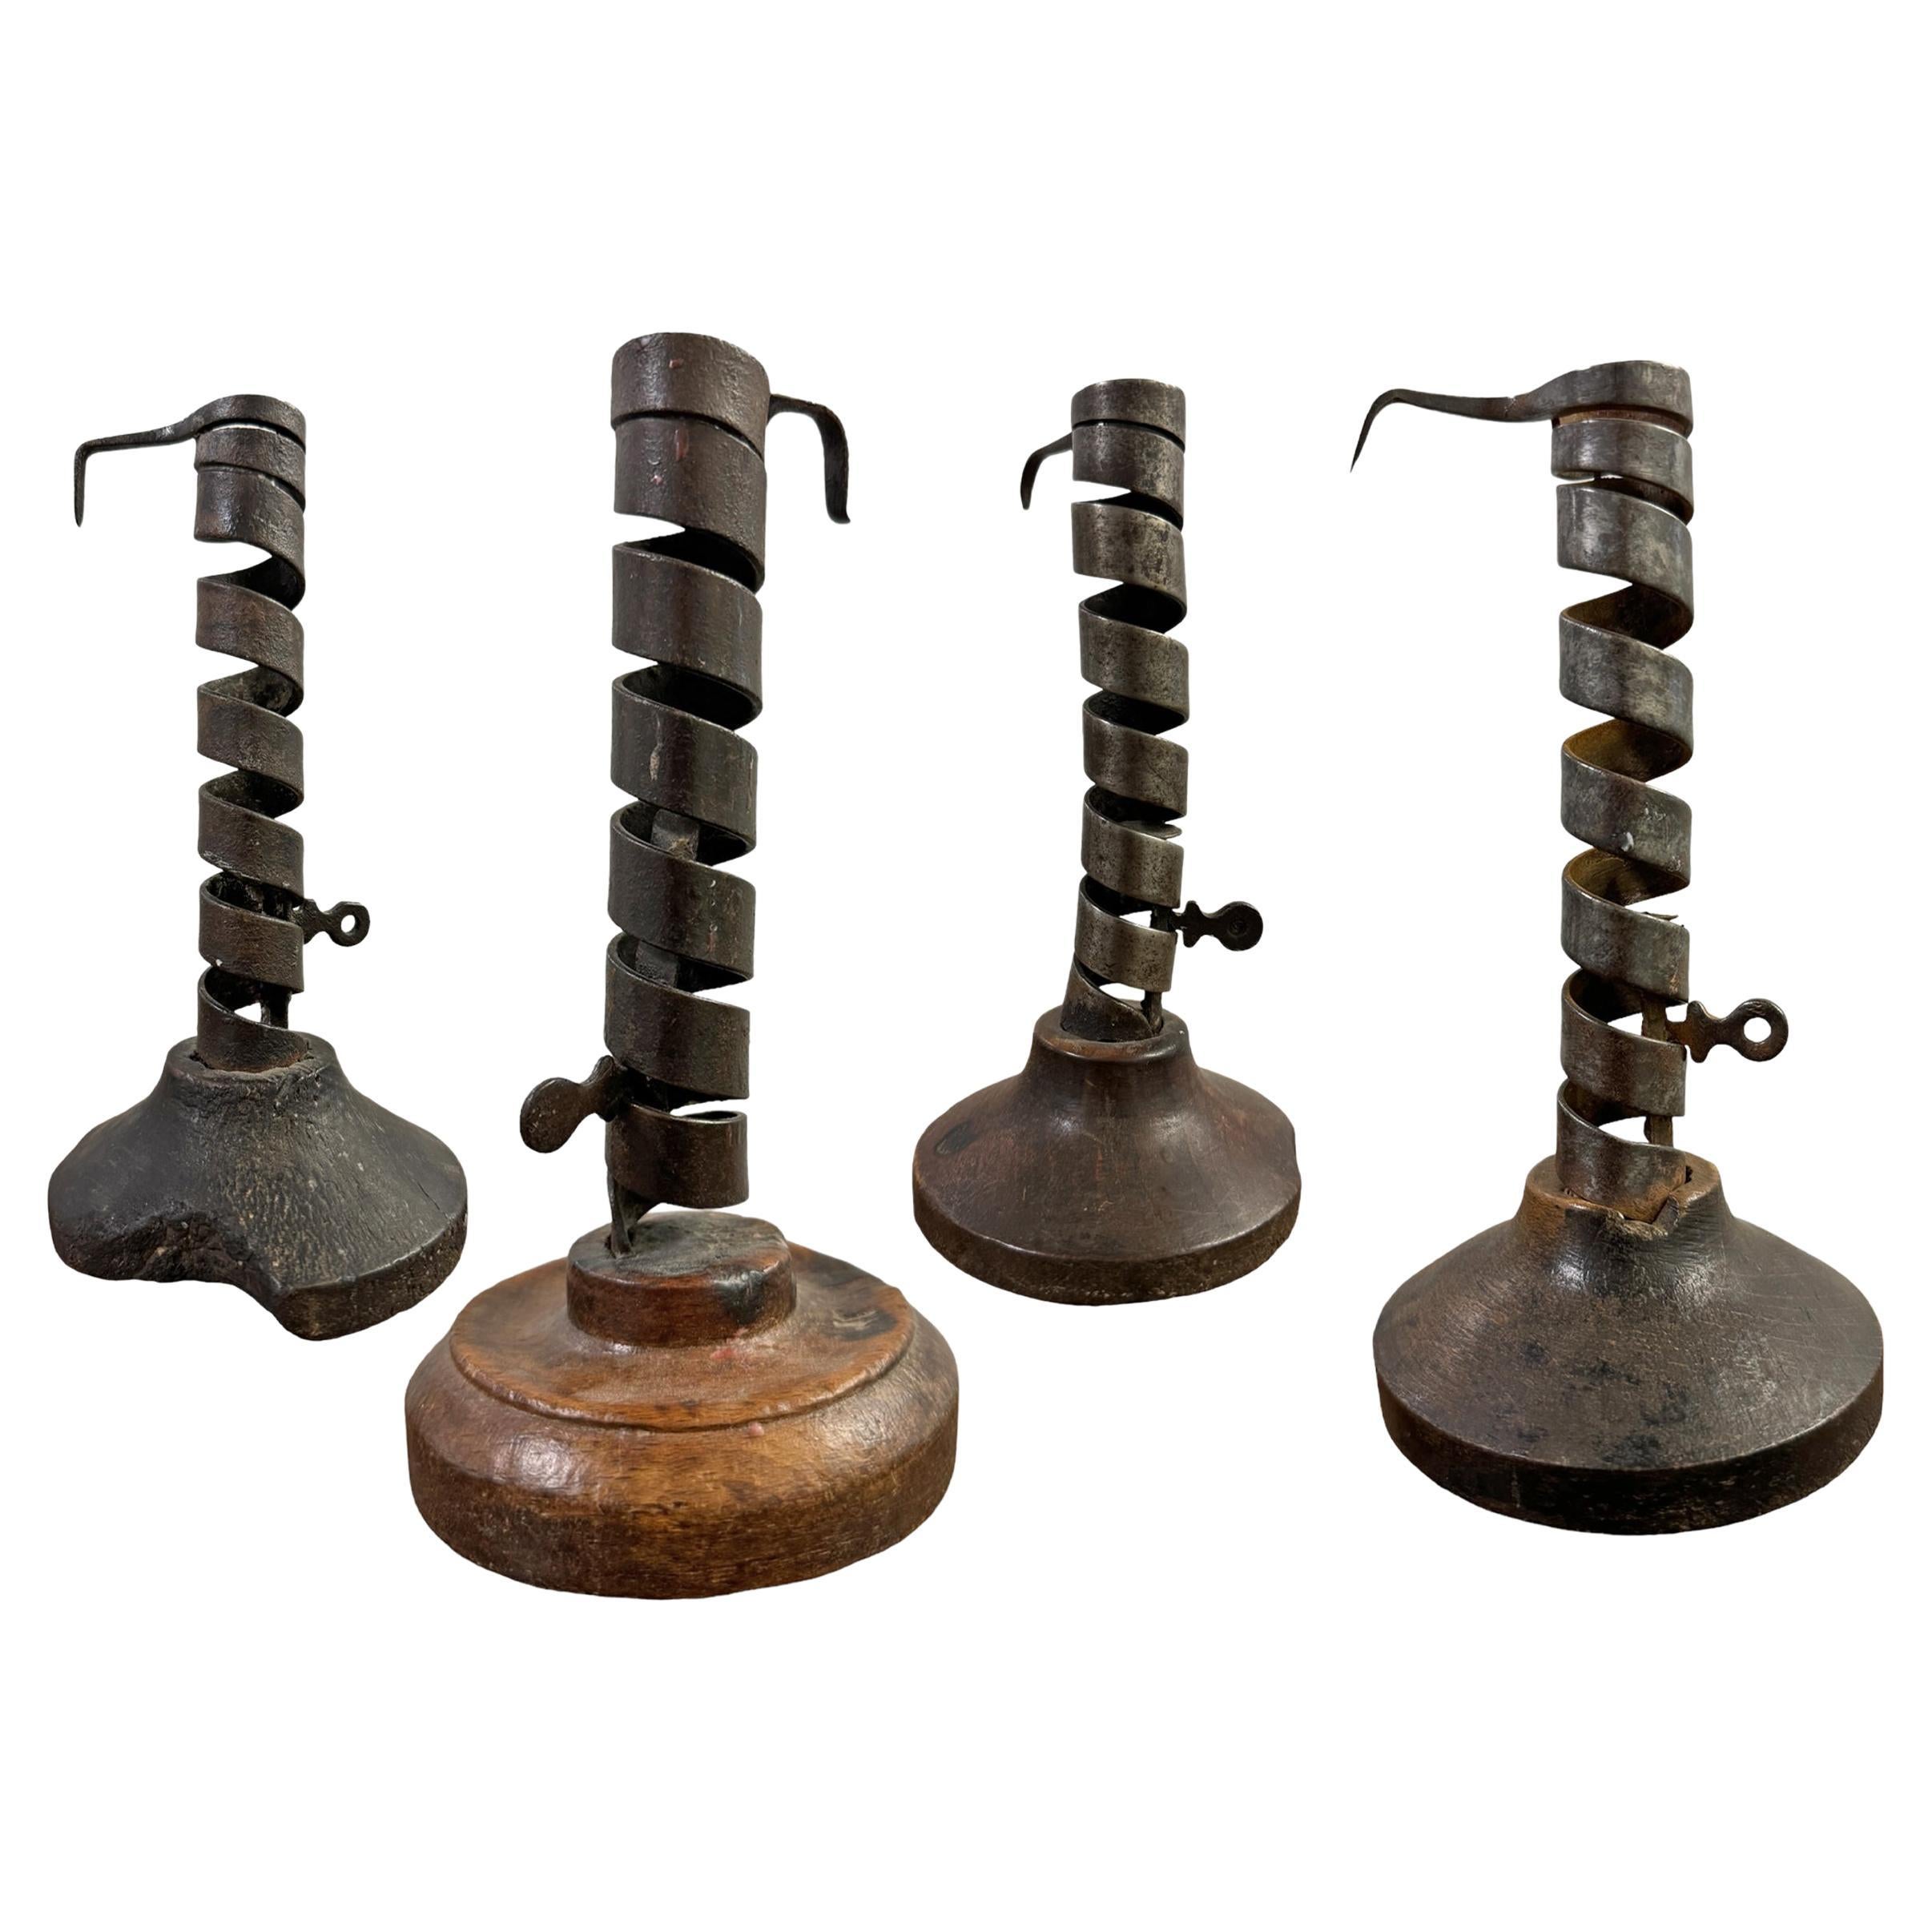 Collection of Four 18th-Century French Miner's Candlesticks